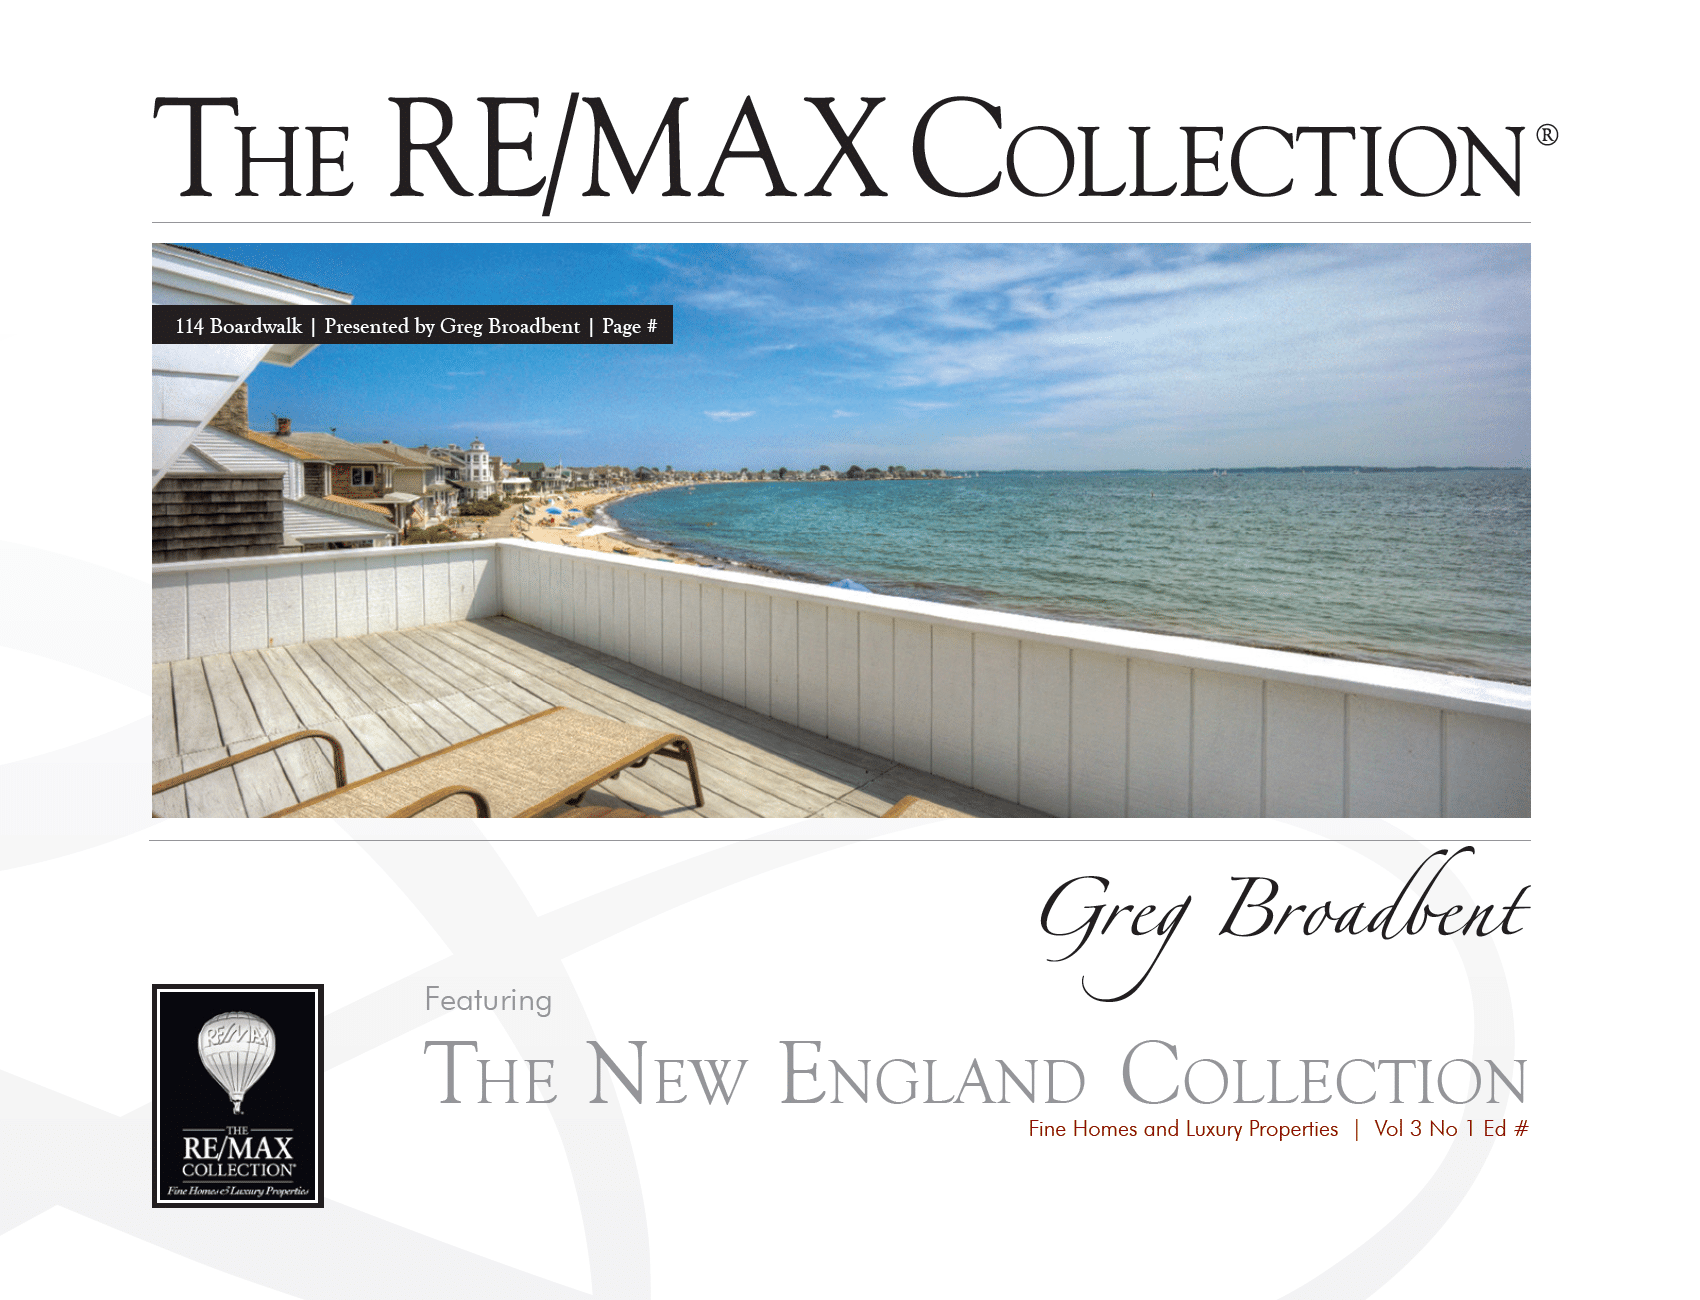 The REMAX Collection Magazine Greg Broadbent March